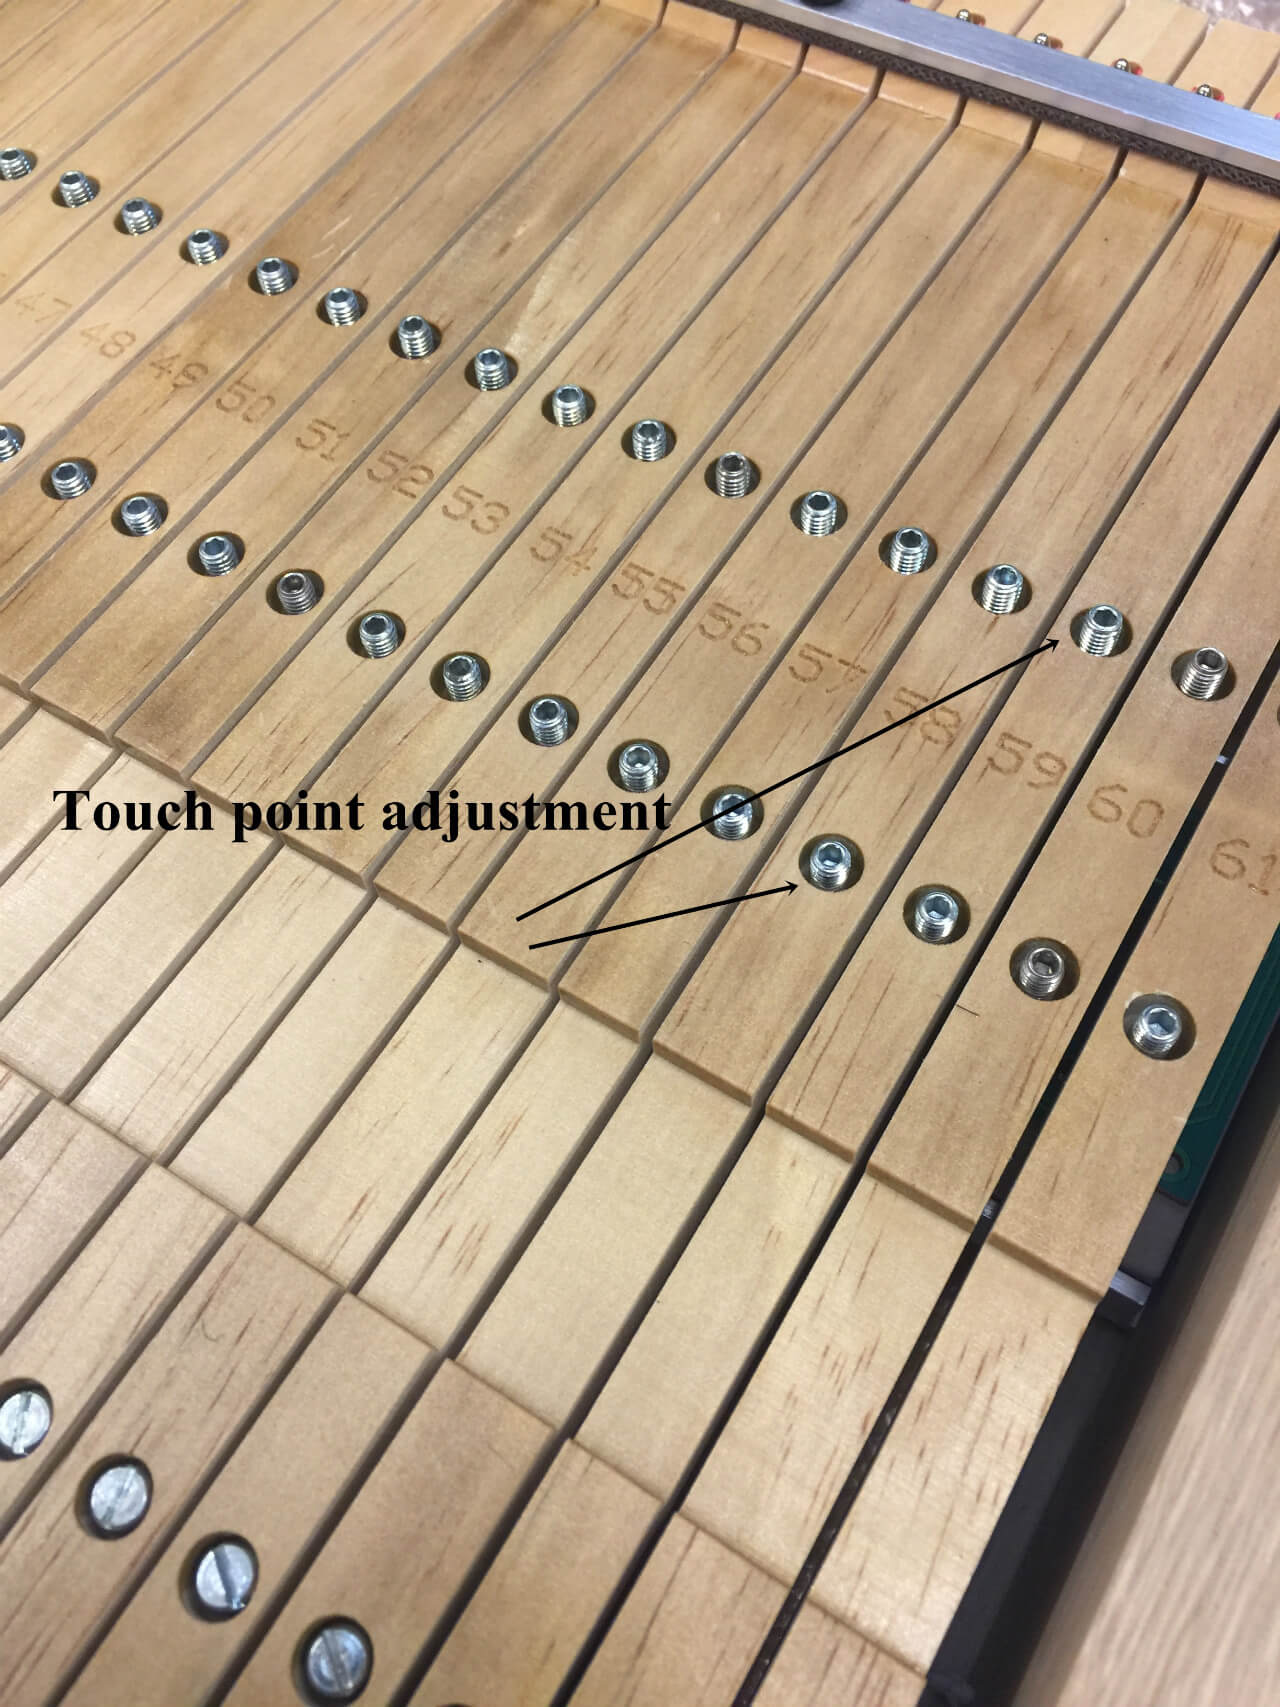 P&S Keyboard touch point adjustments